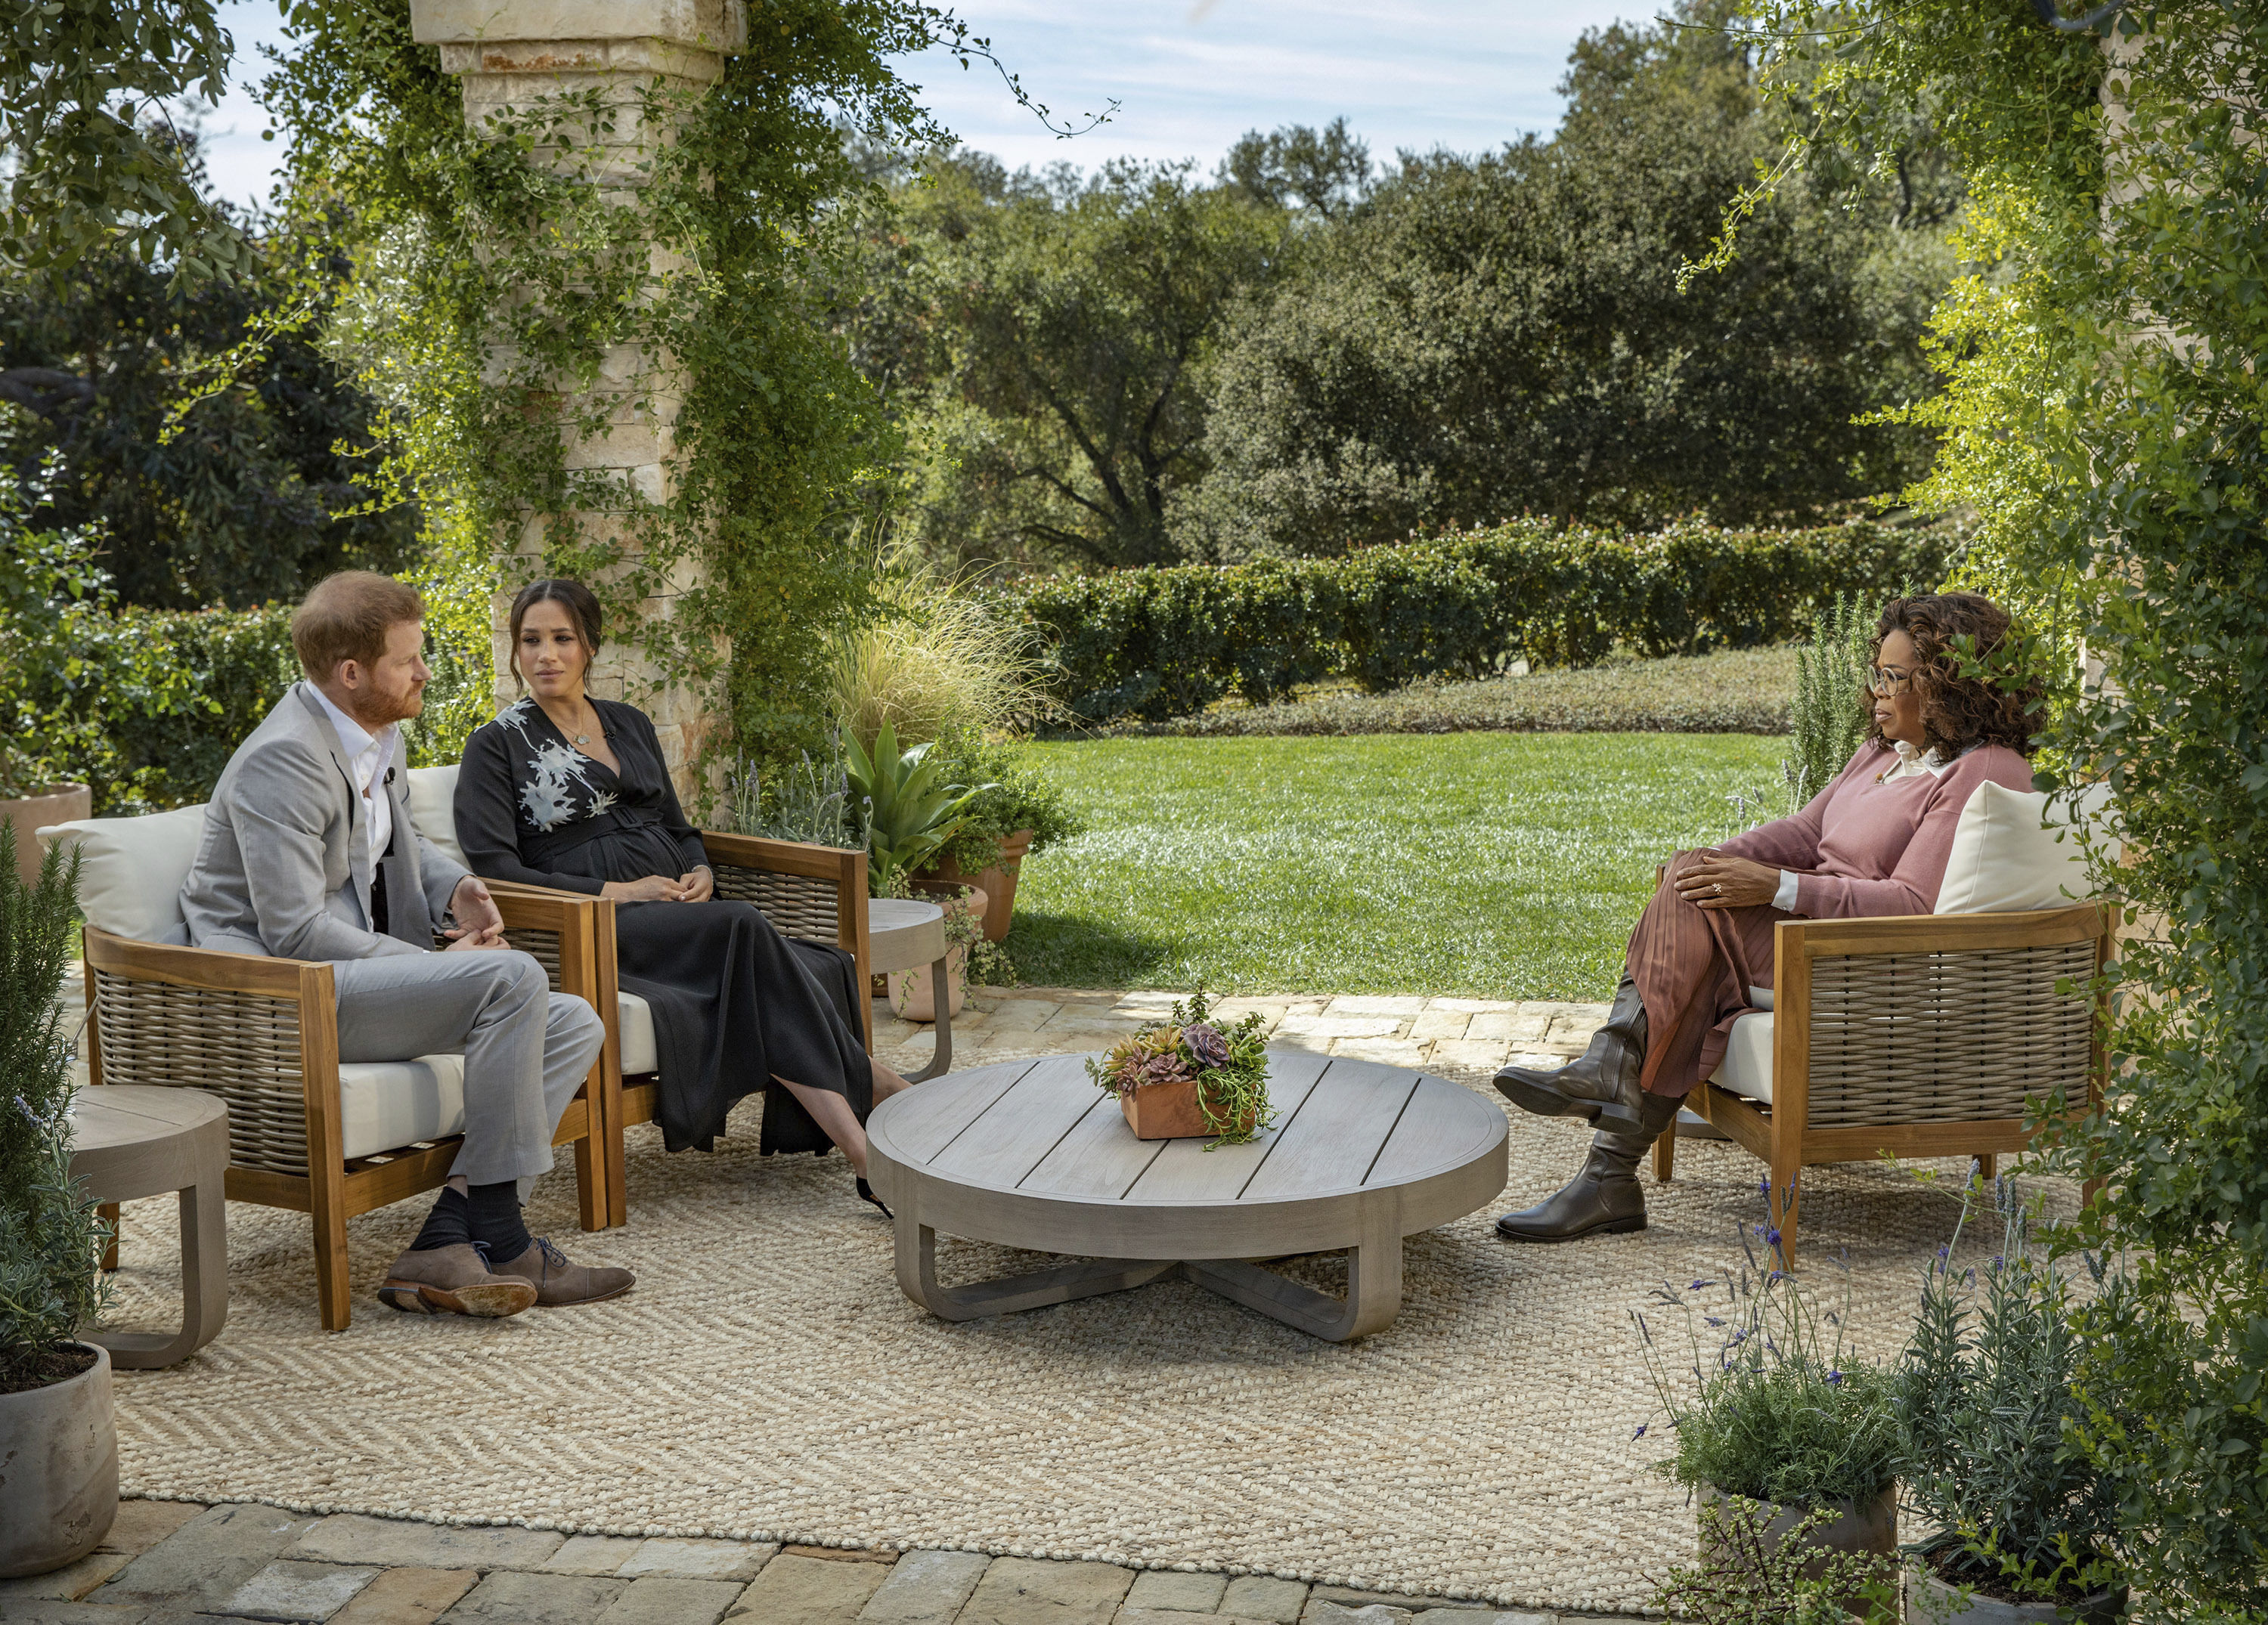 The Duke and Duchess of Sussex during their interview with Oprah Winfrey which was broadcast in the US on March 7 (Harpo Productions)